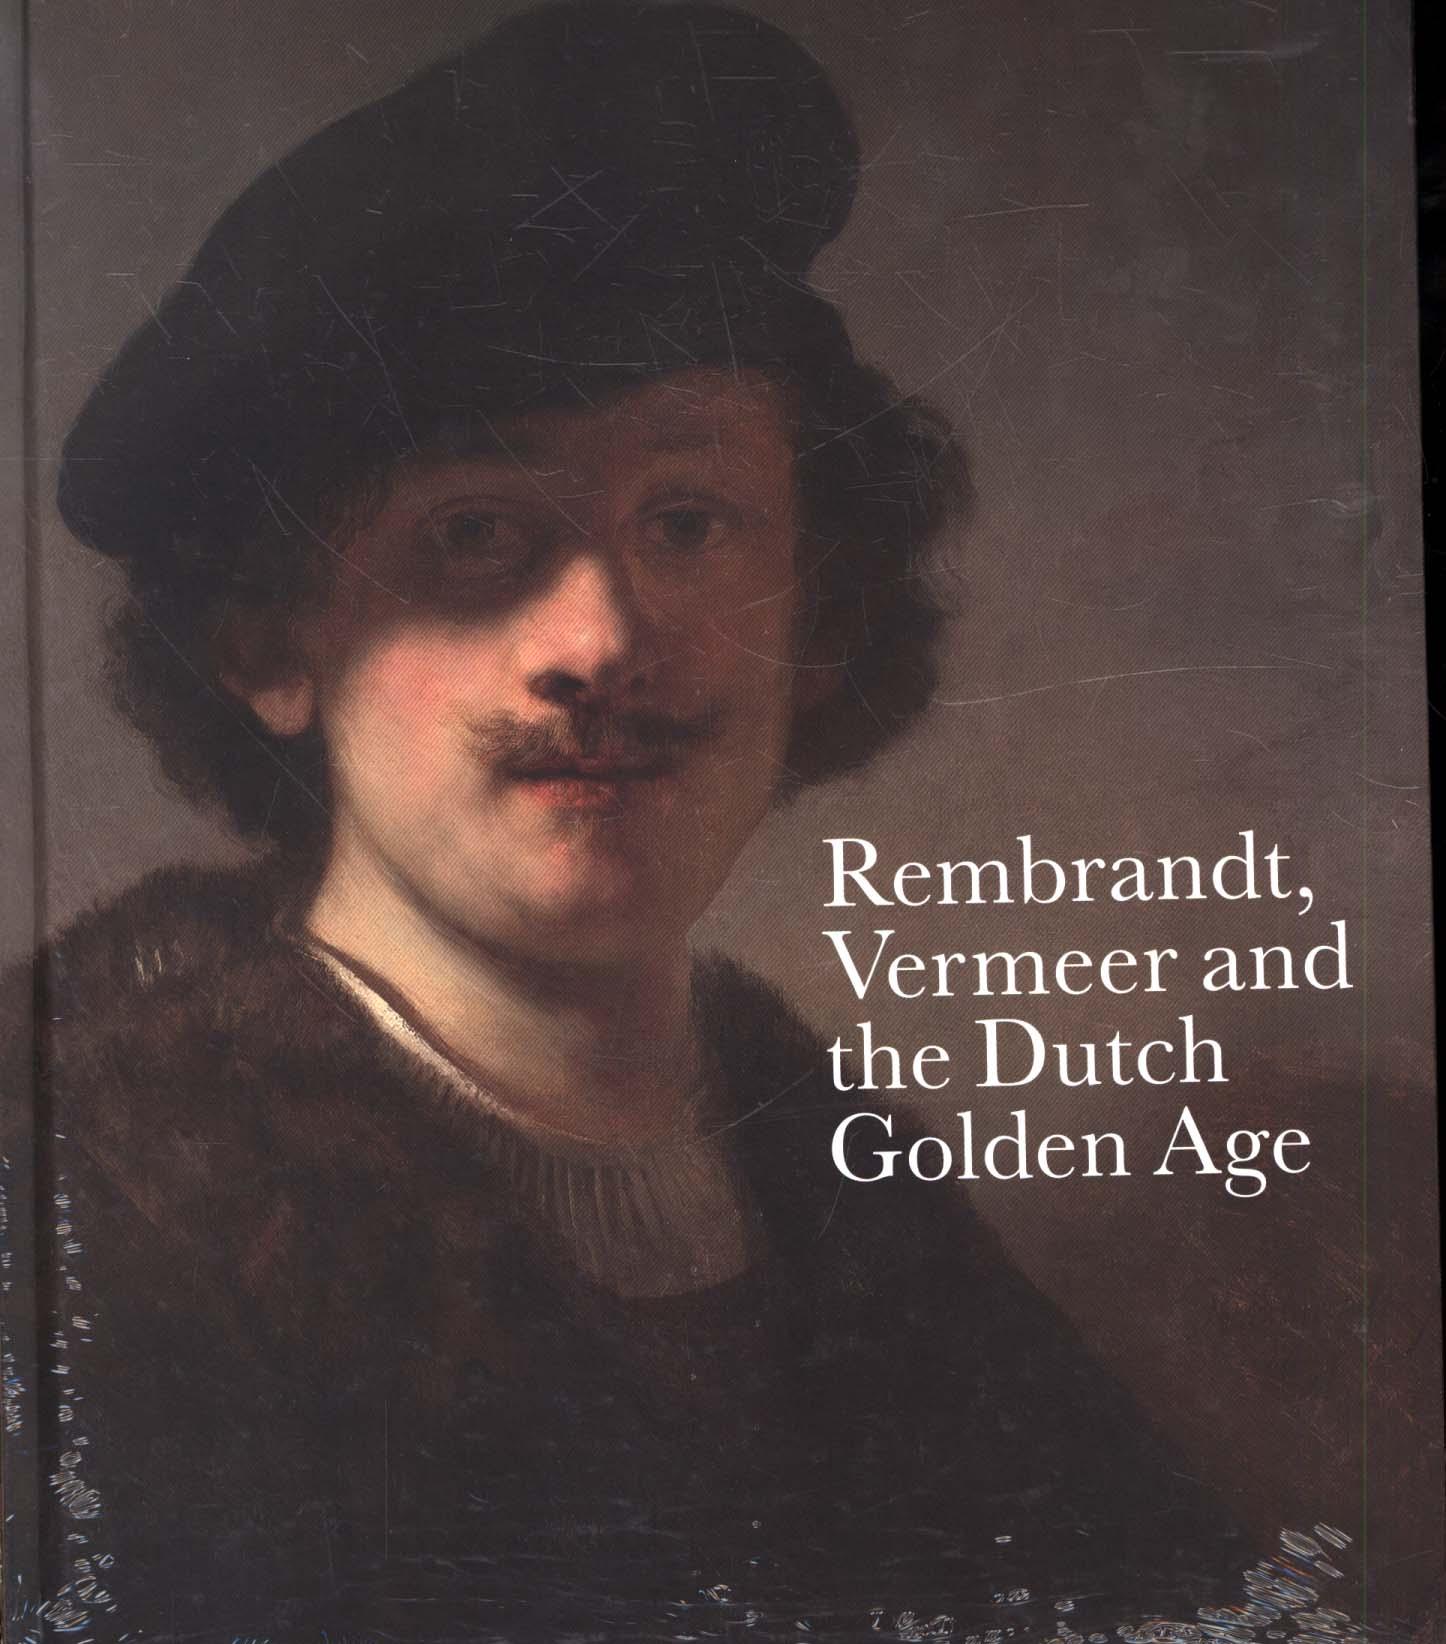 Rembrandt, Vermeer and the Dutch Golden Age